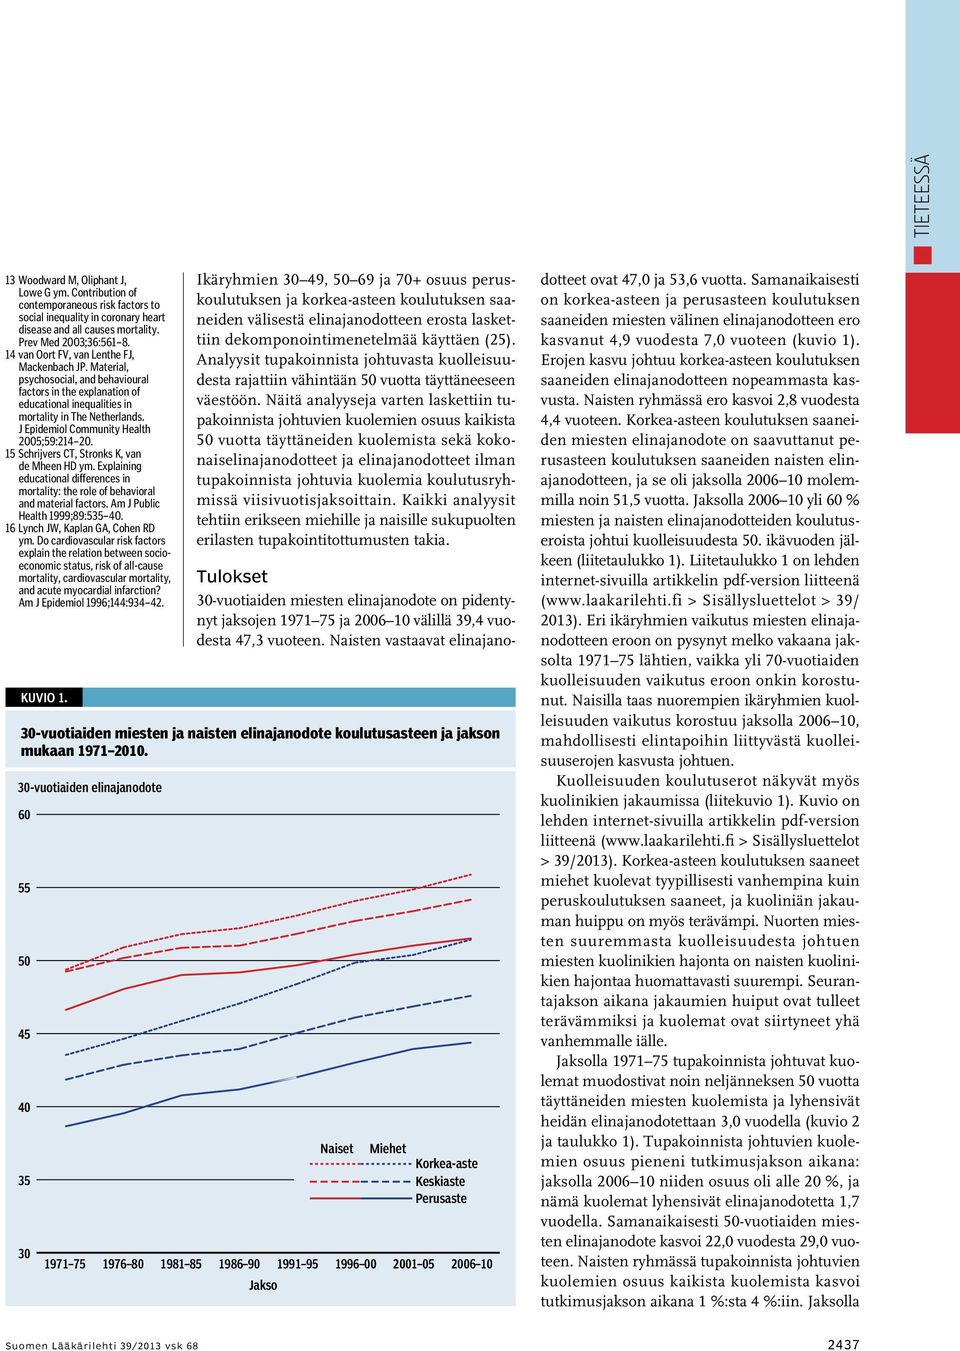 J Epidemiol Community Health 2005;59:24 20. 5 Schrijvers CT, Stronks K, van de Mheen HD ym. Explaining educational differences in mortality: the role of behavioral and material factors.